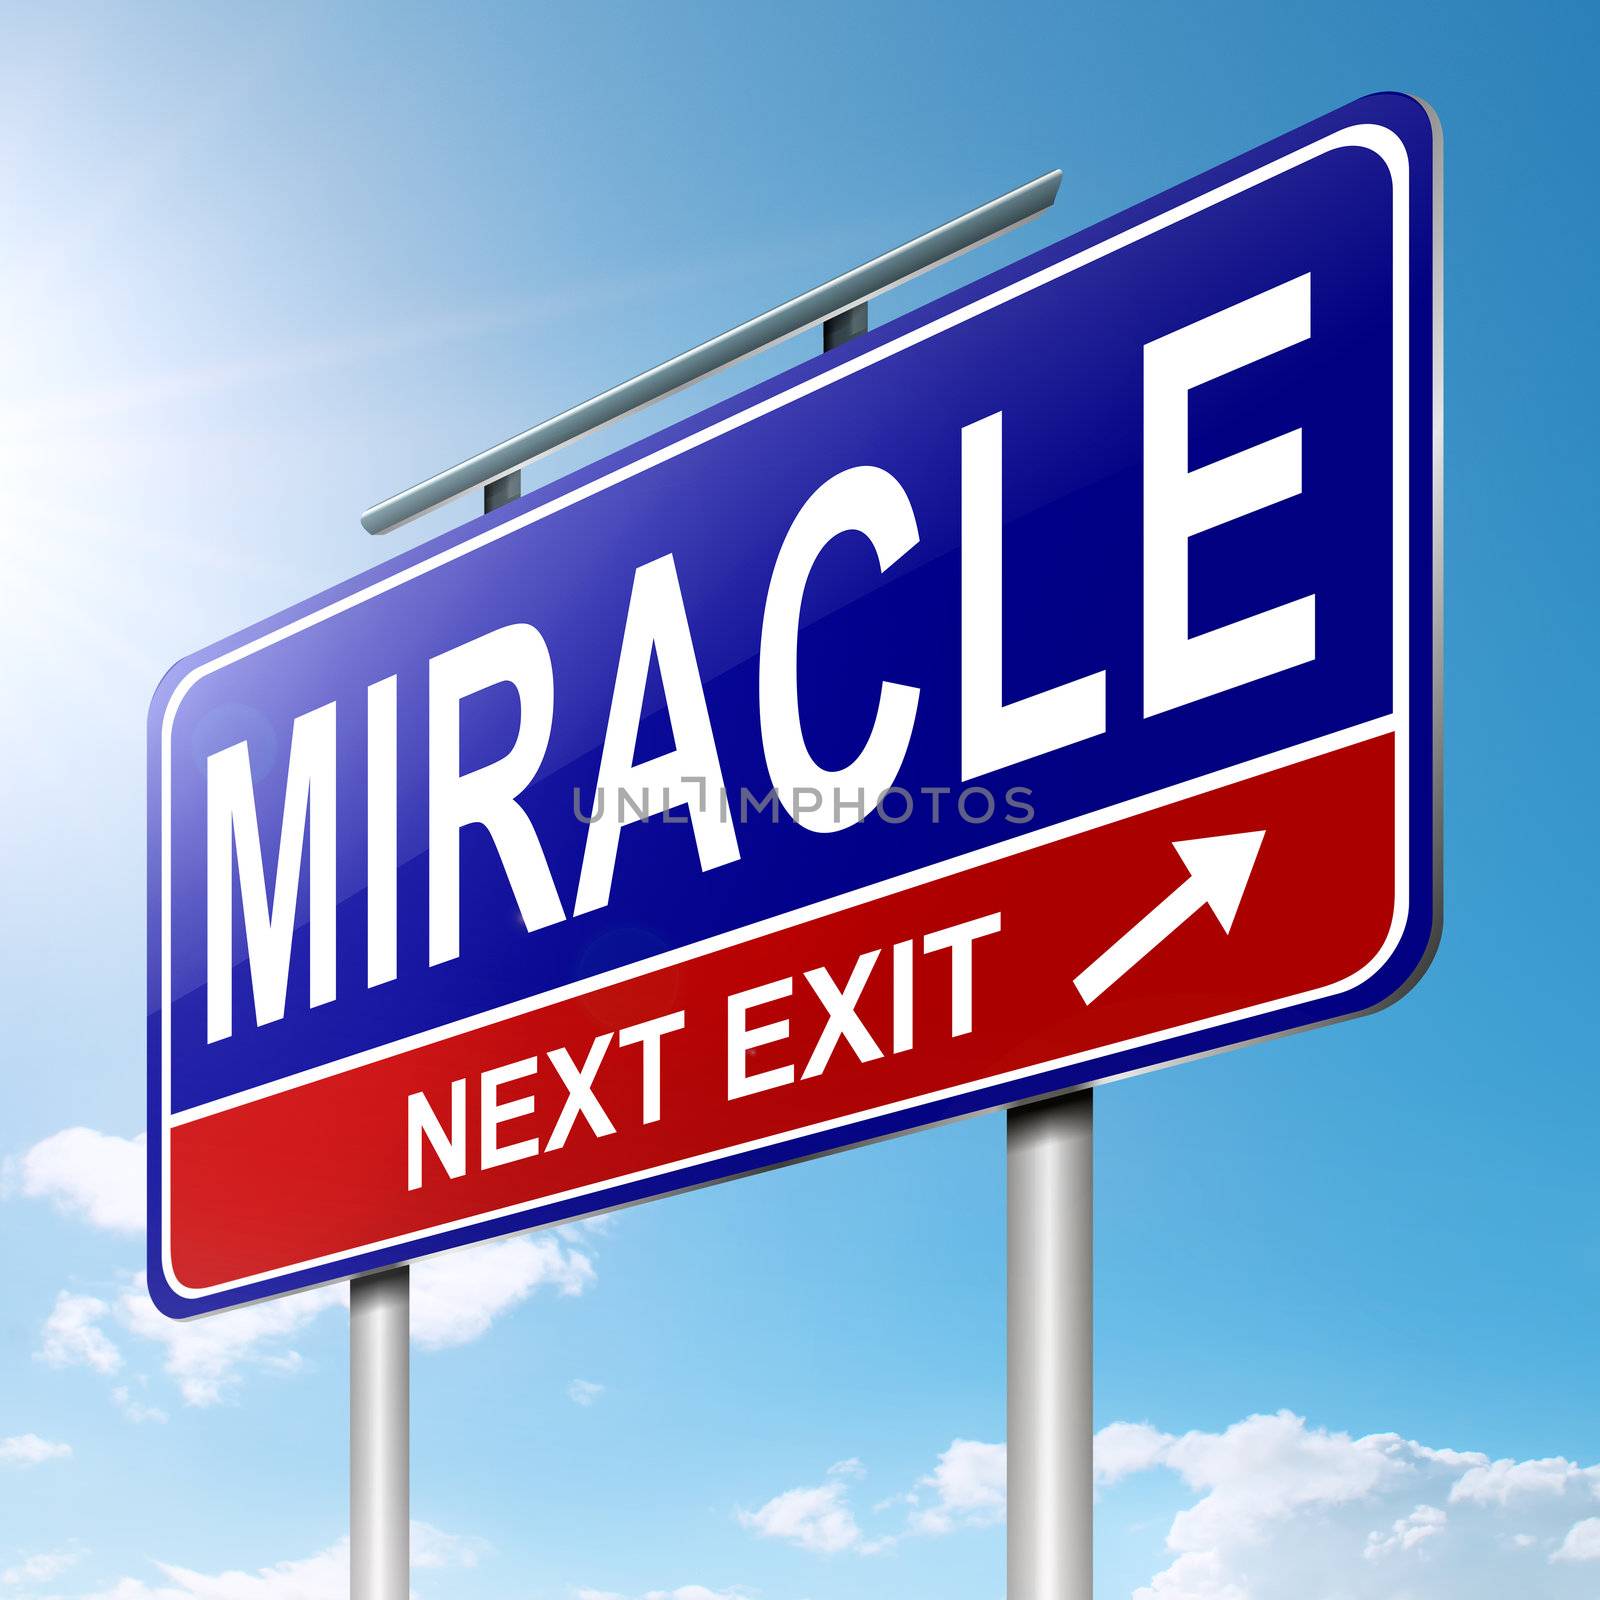 Illustration depicting a roadsign with a miracle concept. Sky background.